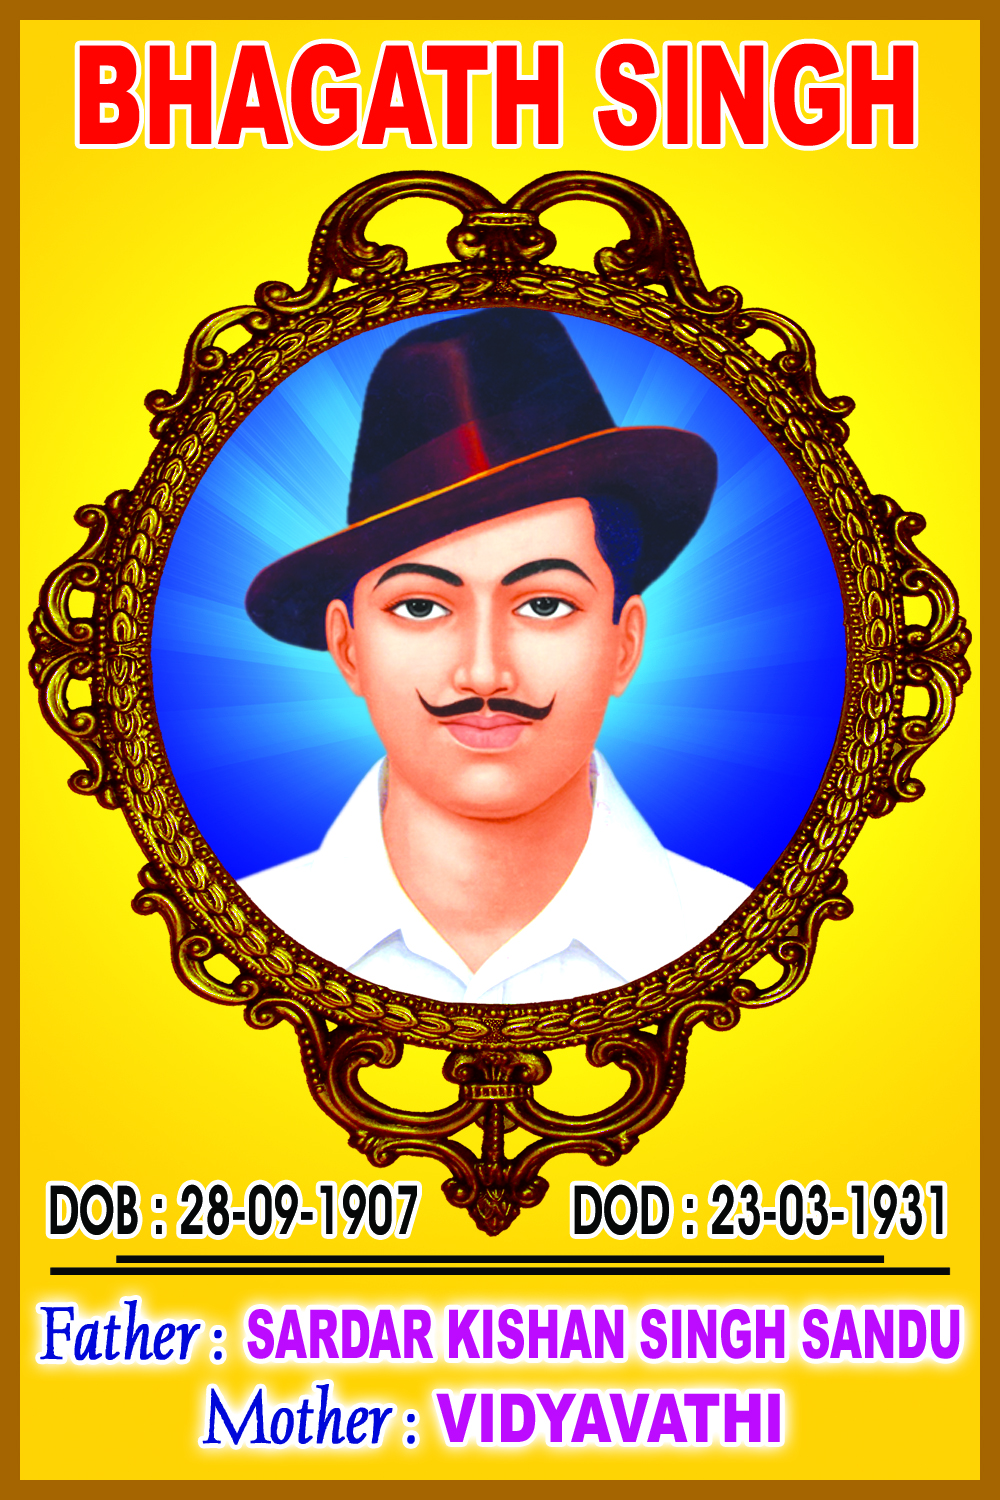 legend bhagat singh indian national hero image with names | naveengfx